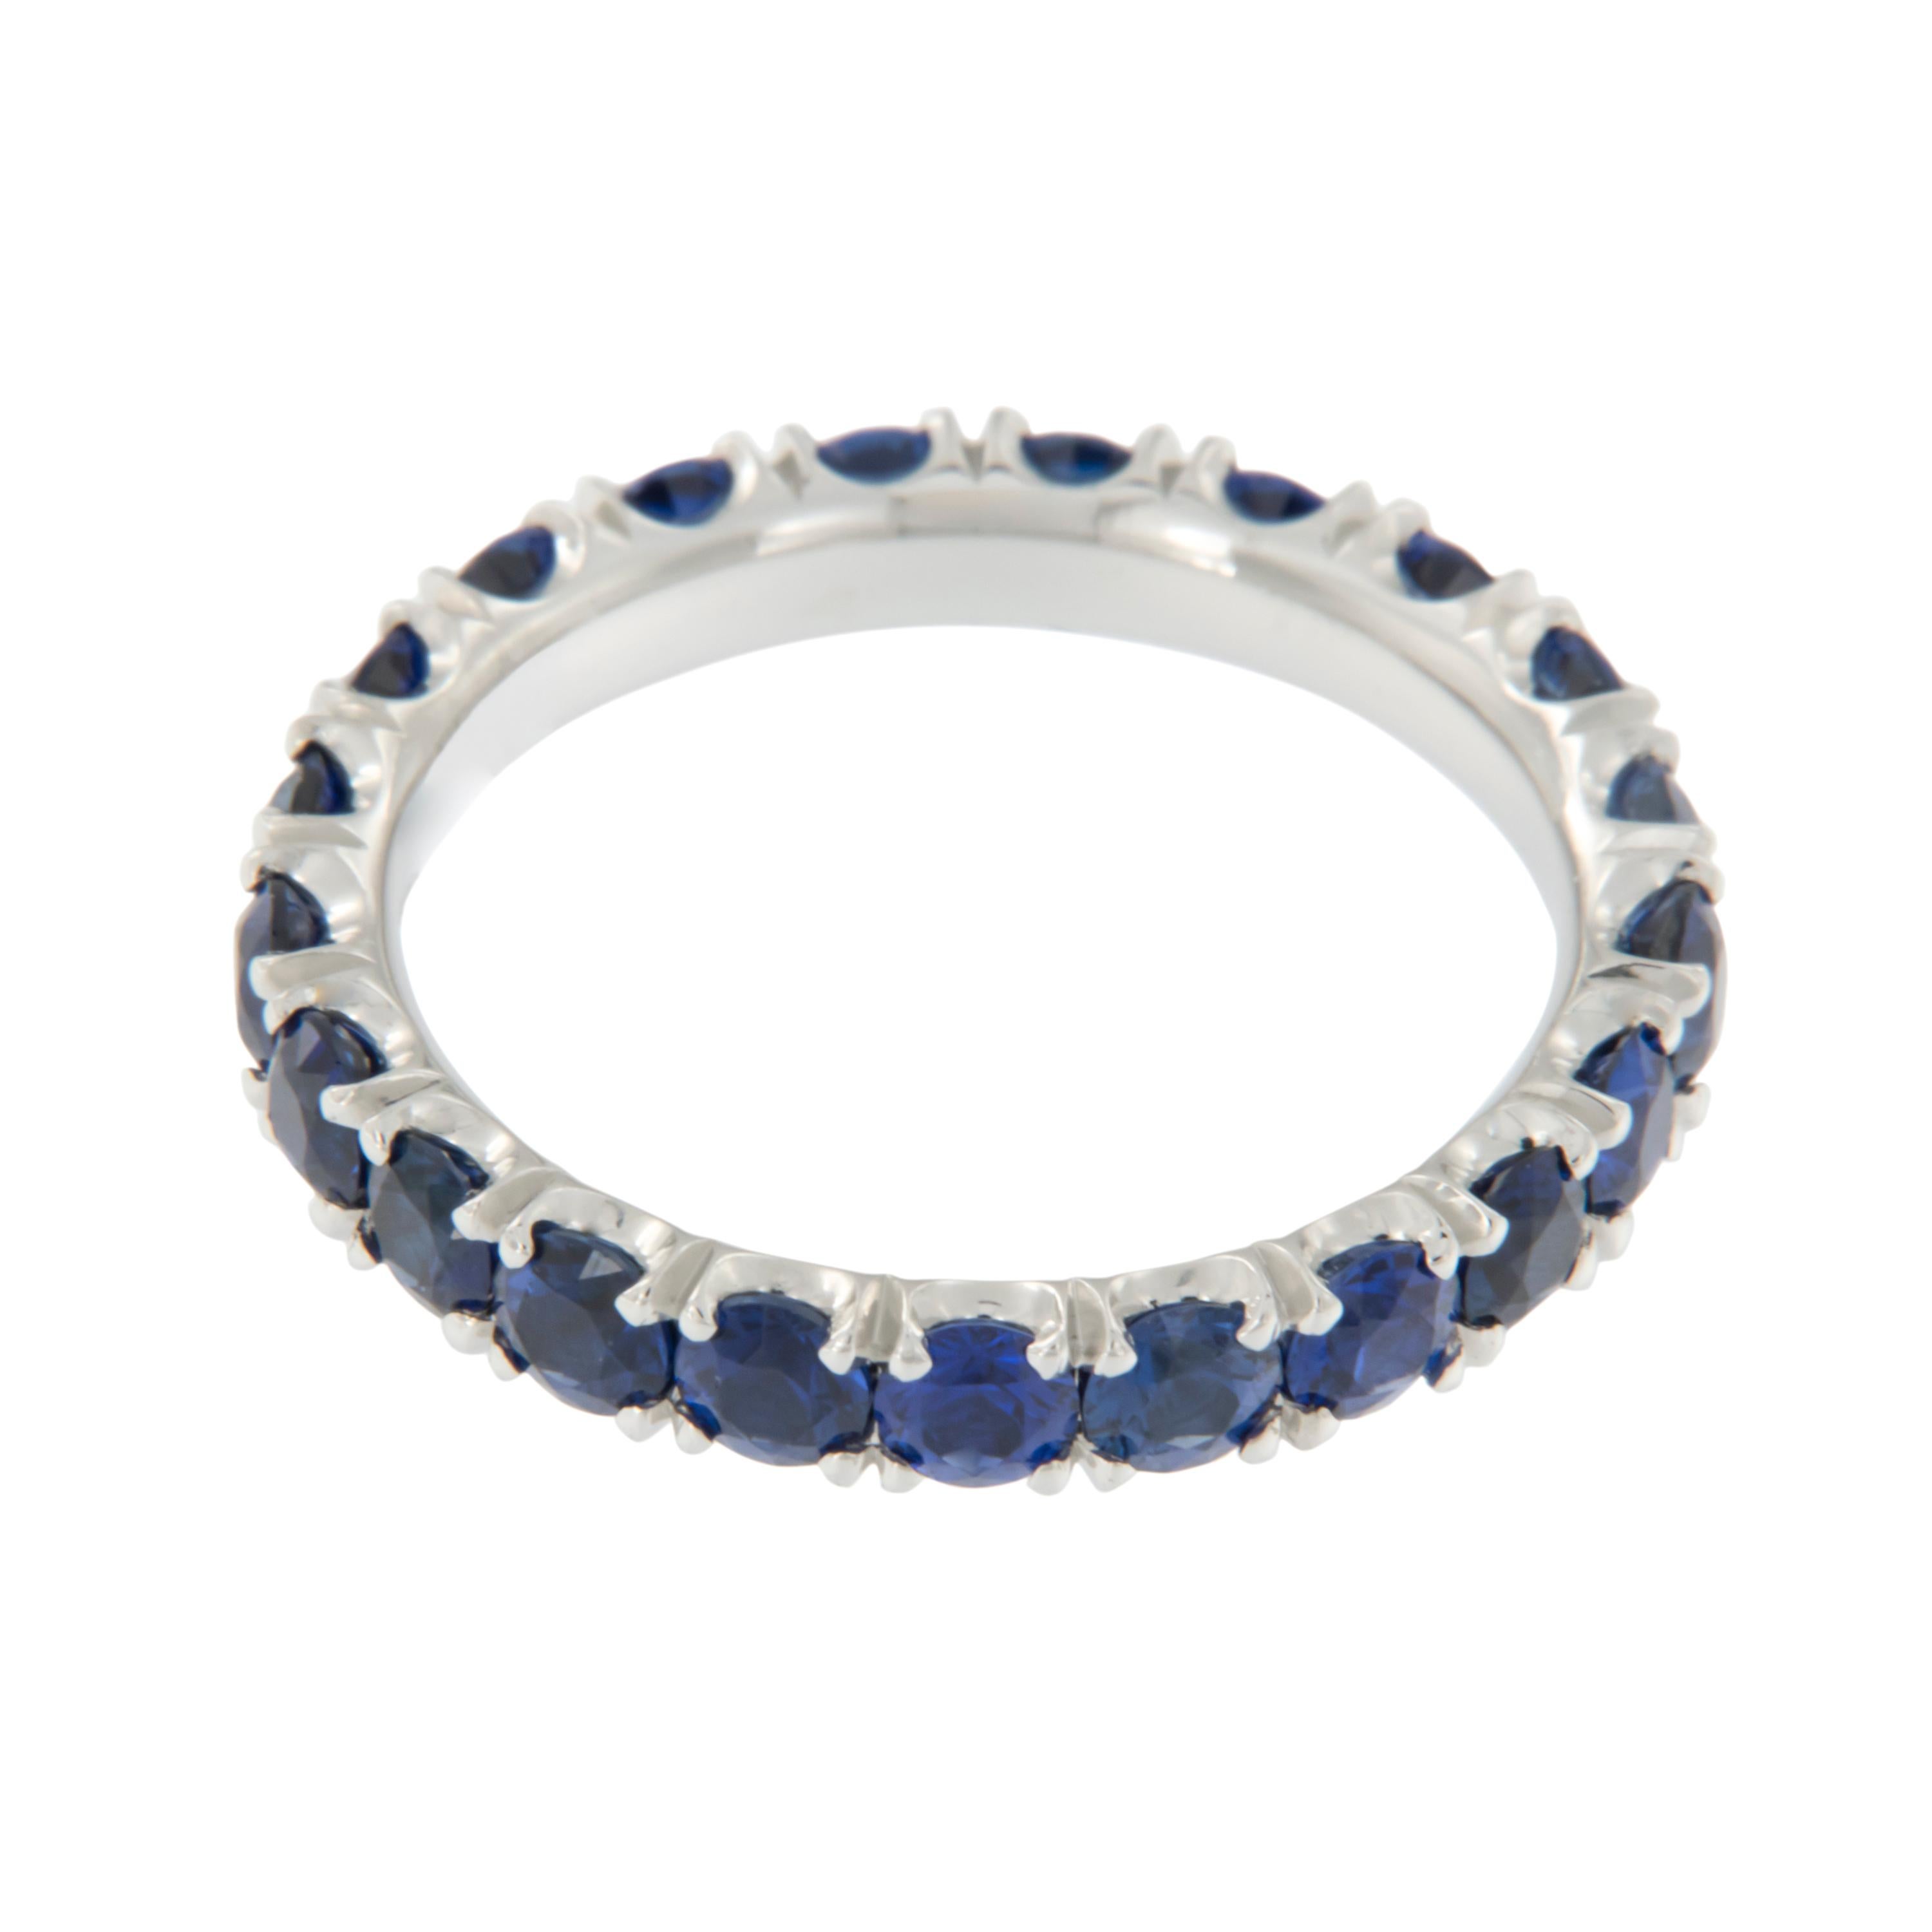 Round Cut Matched Set of Platinum 5.40 Cttw Blue Sapphire Eternity Bands by WR Designs